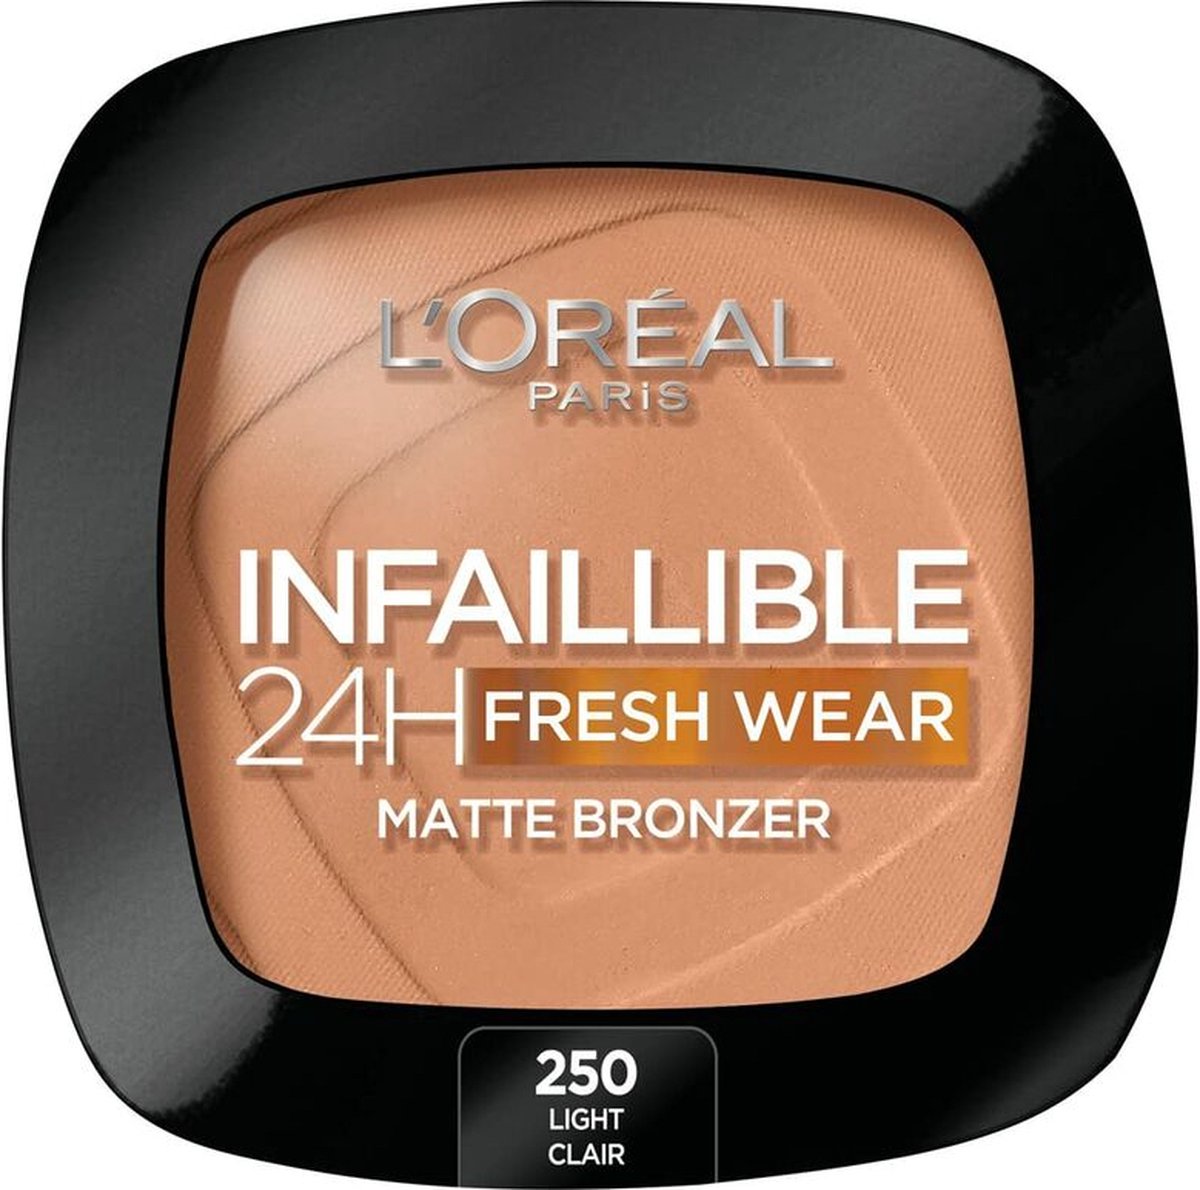 Compacte Bronspoeders L'Oreal Make Up Infaillible 250-light clair 24 uur (9 g)